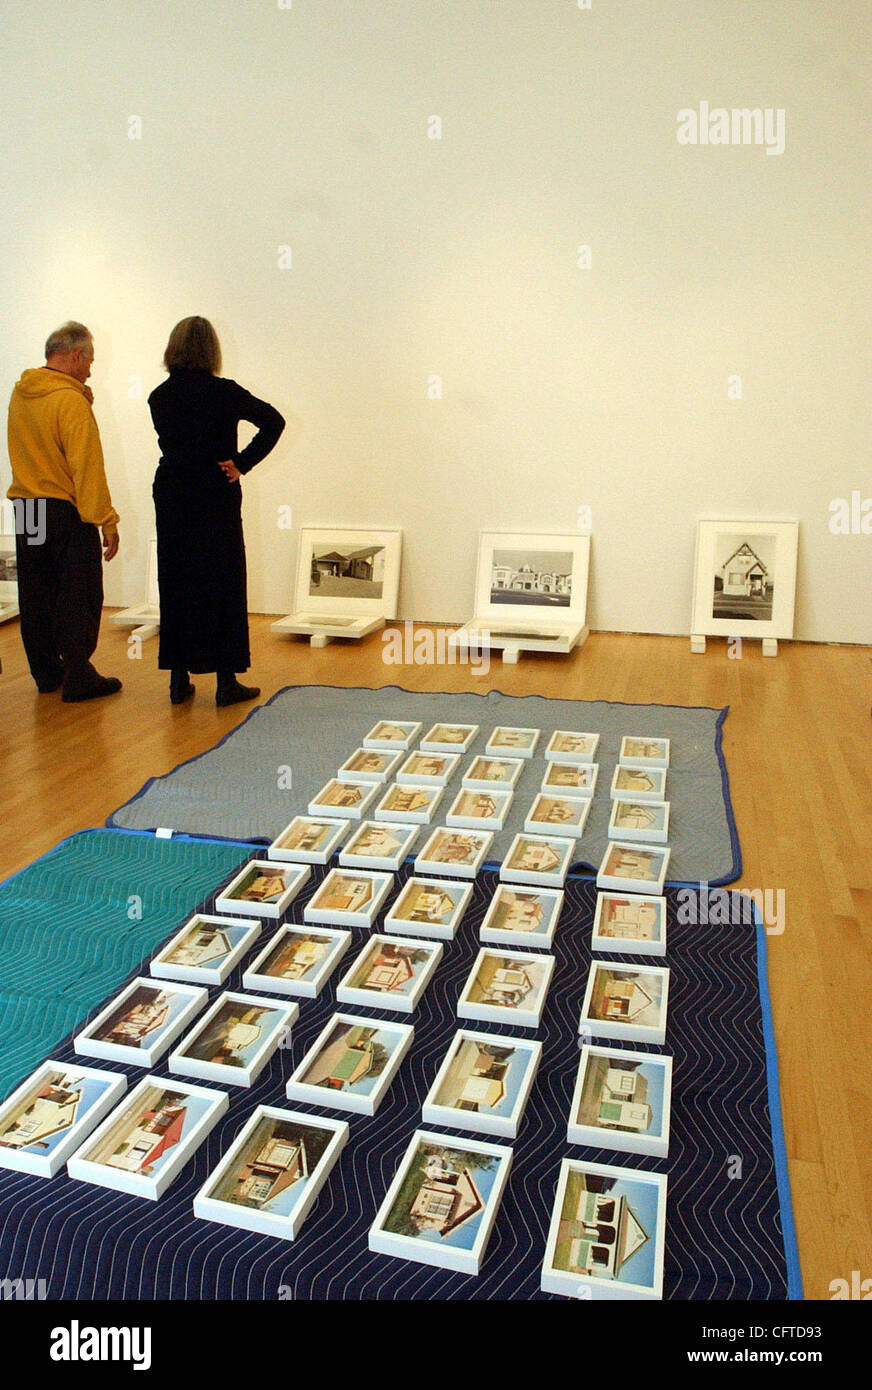 Pt. Richmond photographer Henry Wessel and Sandra S. Phillips, senior curator of photography at SFMOMA, look over the installation of a retrospect of Wessel's work at SFMOMA in San Francisco, Calif., on Monday, Jan. 8, 2007.  (JOANNA JHANDA/CONTRA COSTA TIMES) Stock Photo